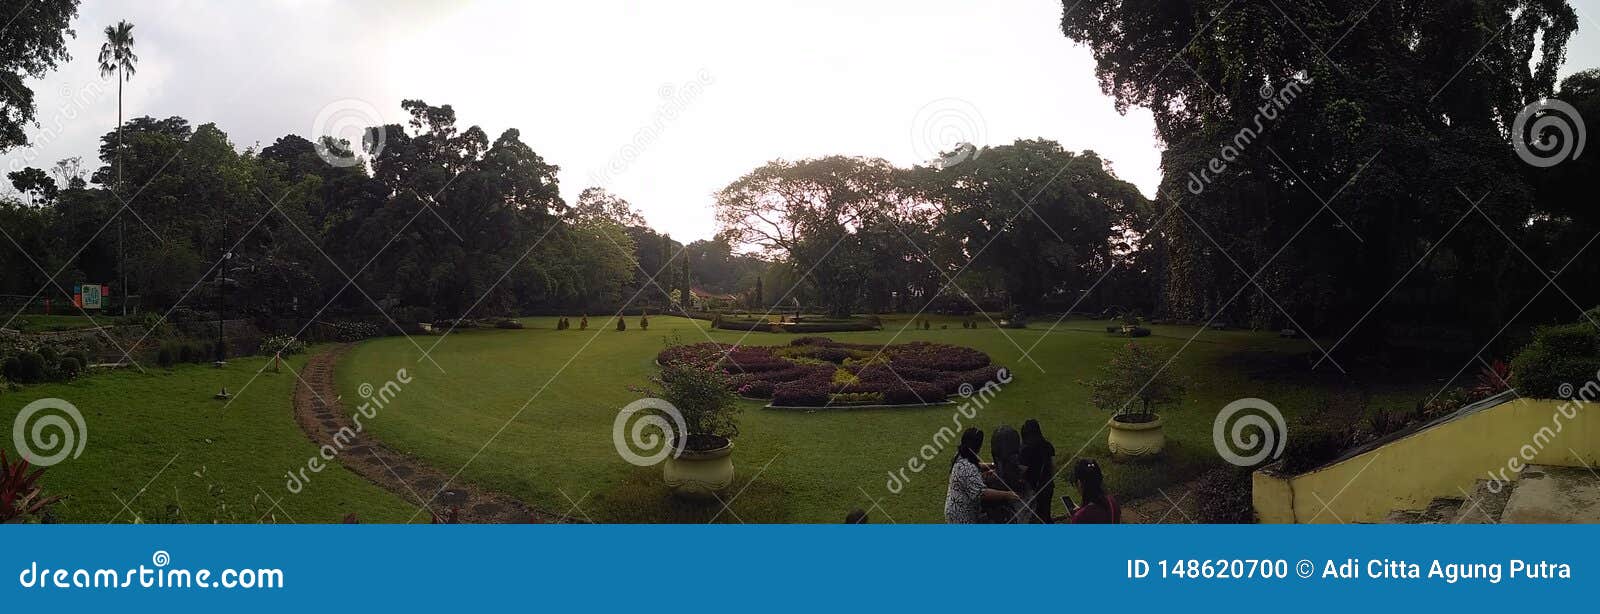 42 182 Garden Indonesia Photos Free Royalty Free Stock Photos From Dreamstime